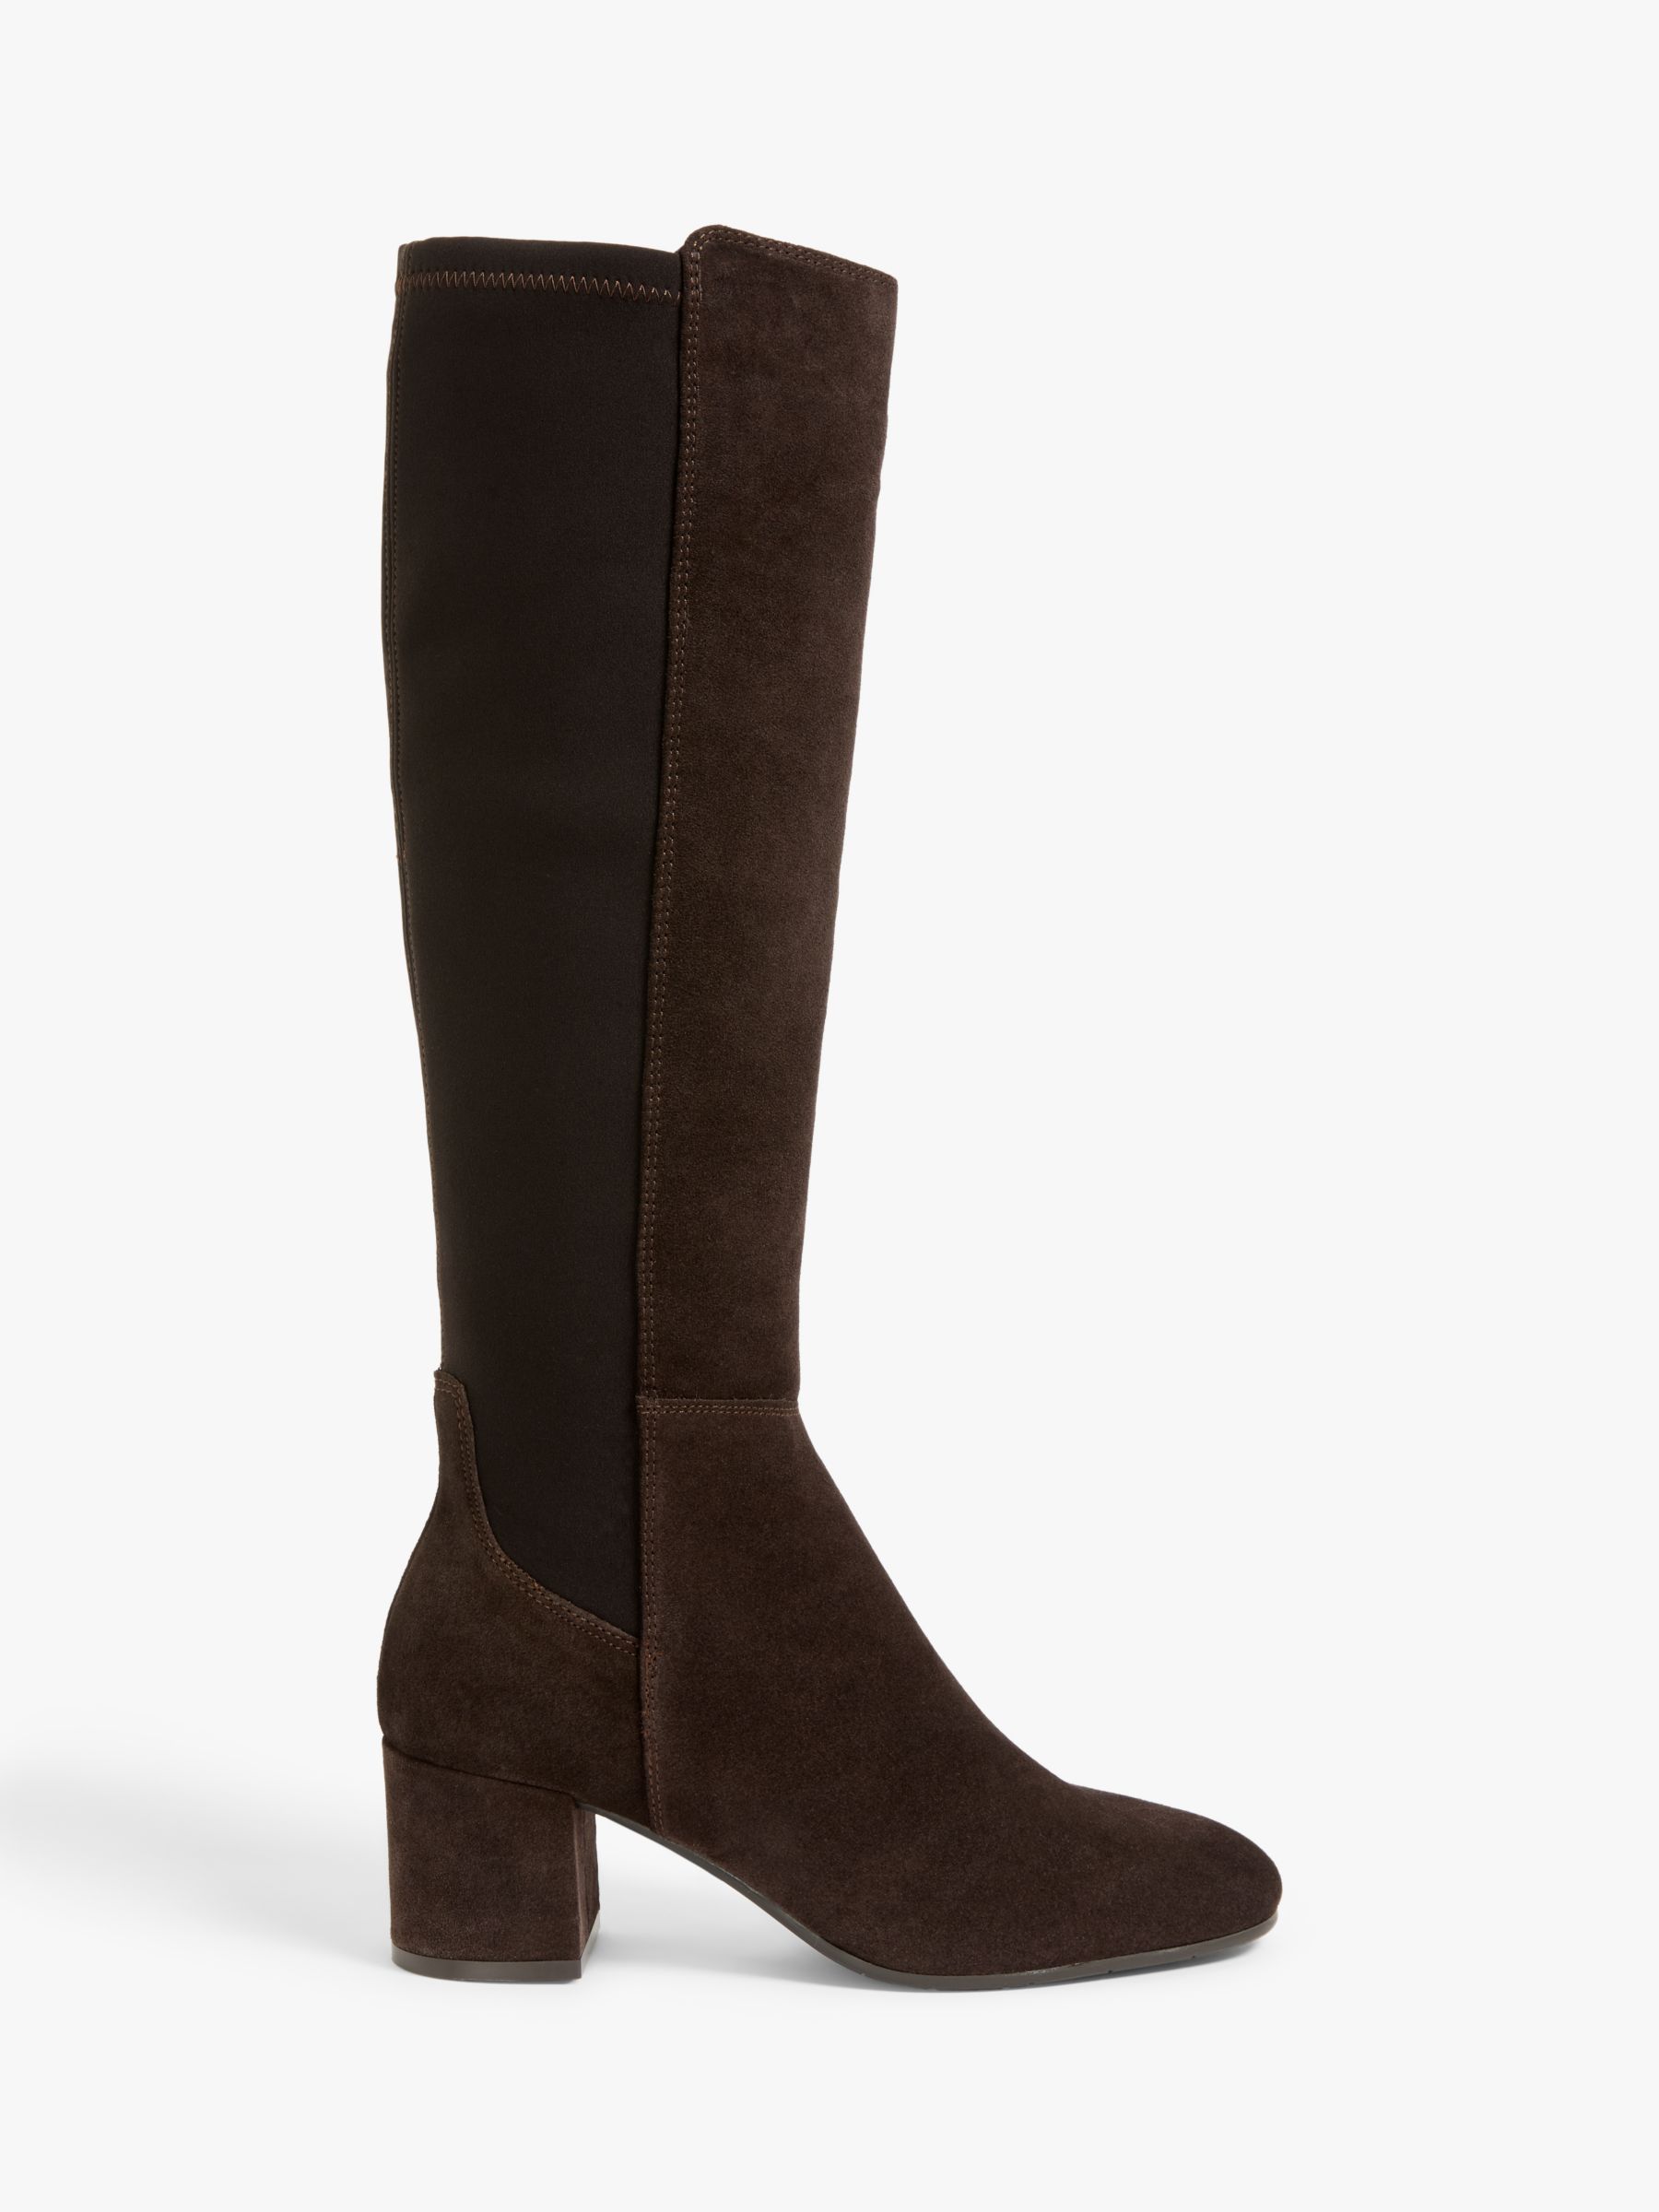 Knee high suede boots uk